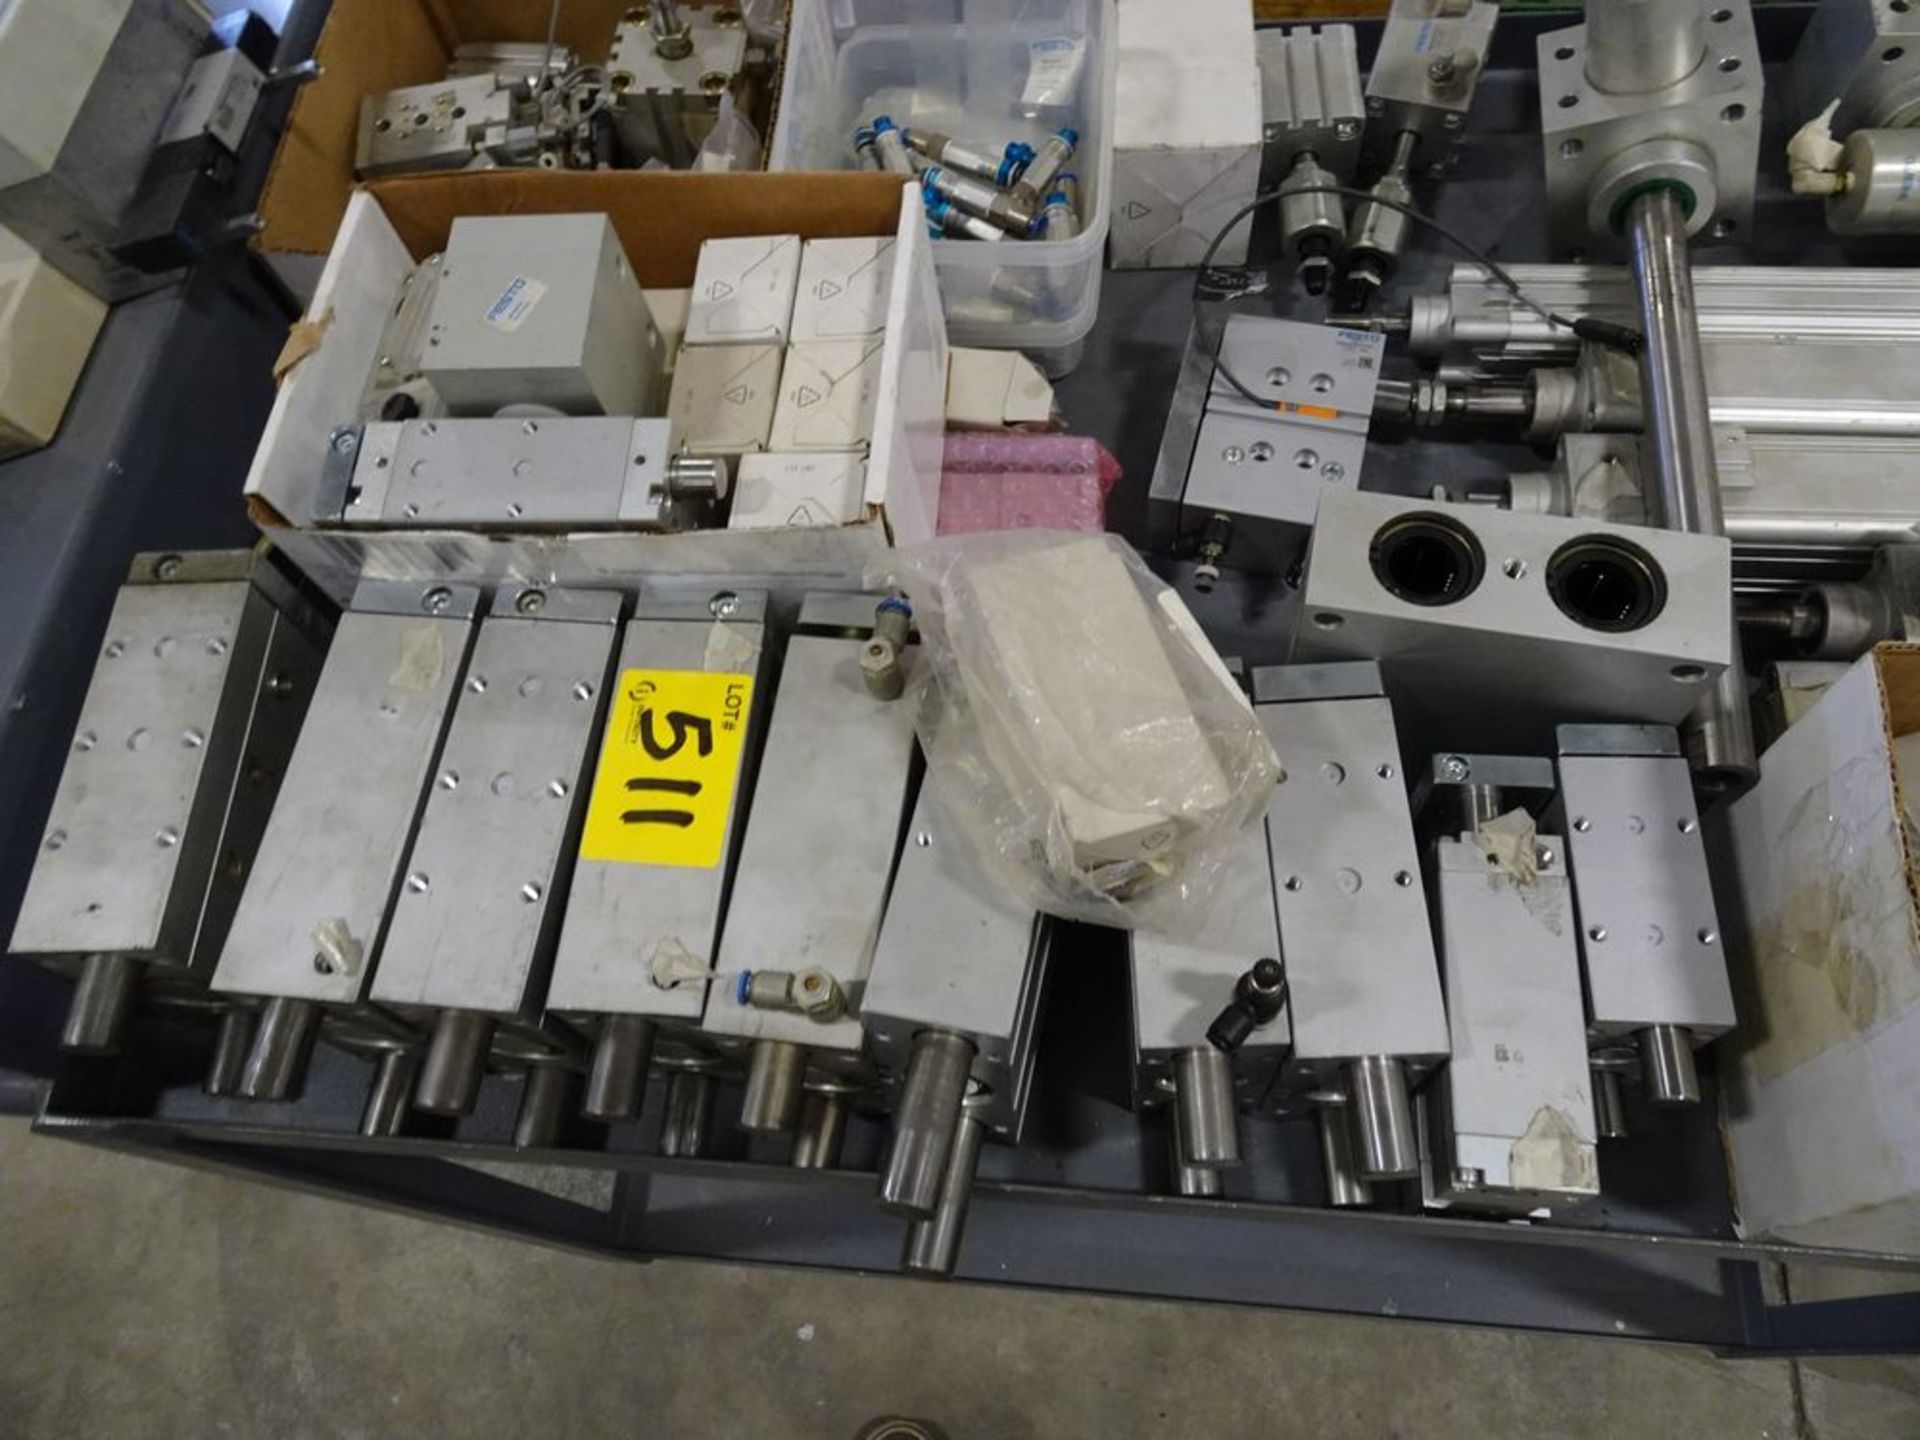 ASSORTED PRODUCT, CYLINDERS, FESTO VALVES, FITTINGS, ETC. - Image 4 of 5